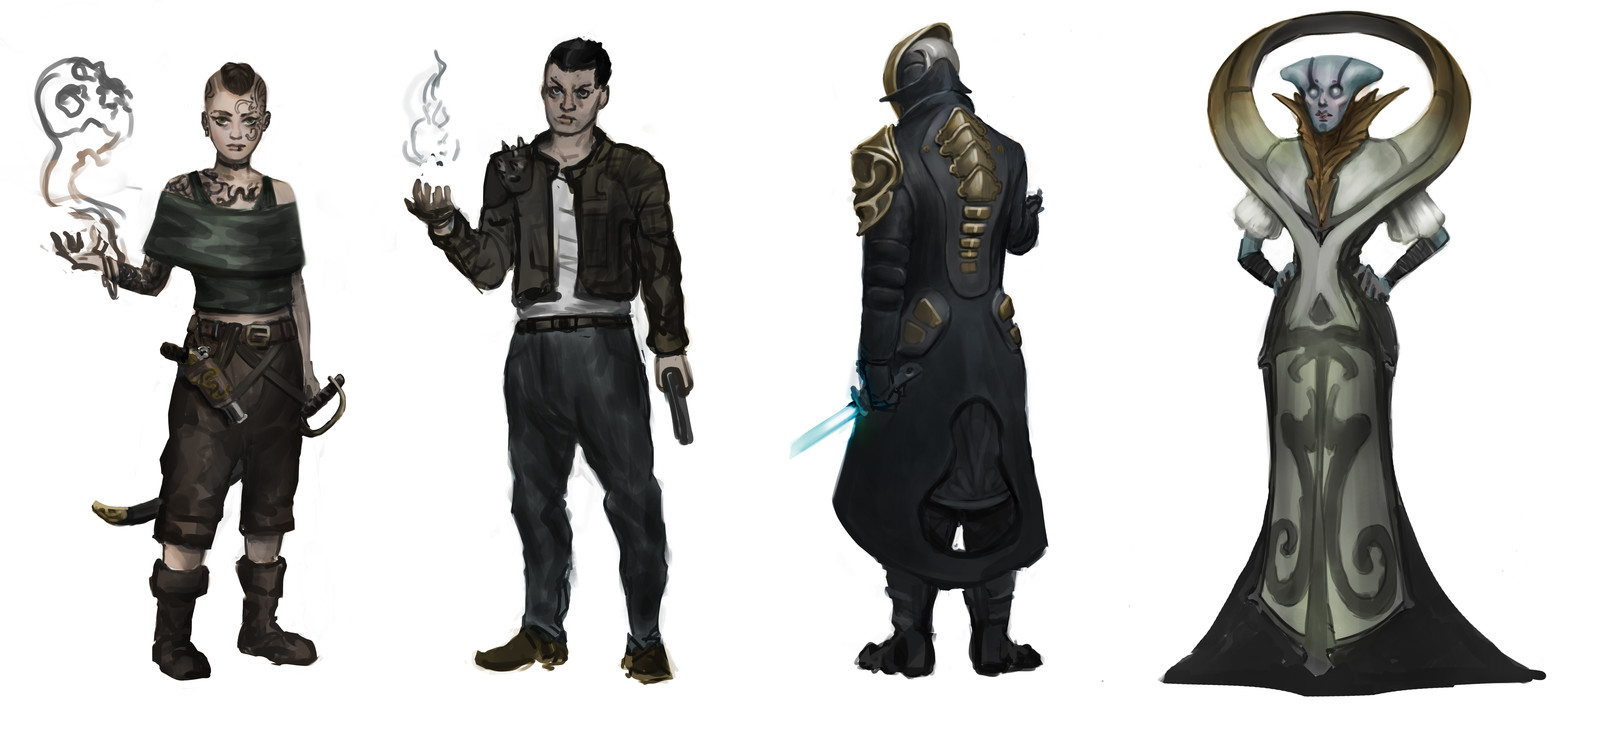 mages/wizard sketches/styleexploration from different genres